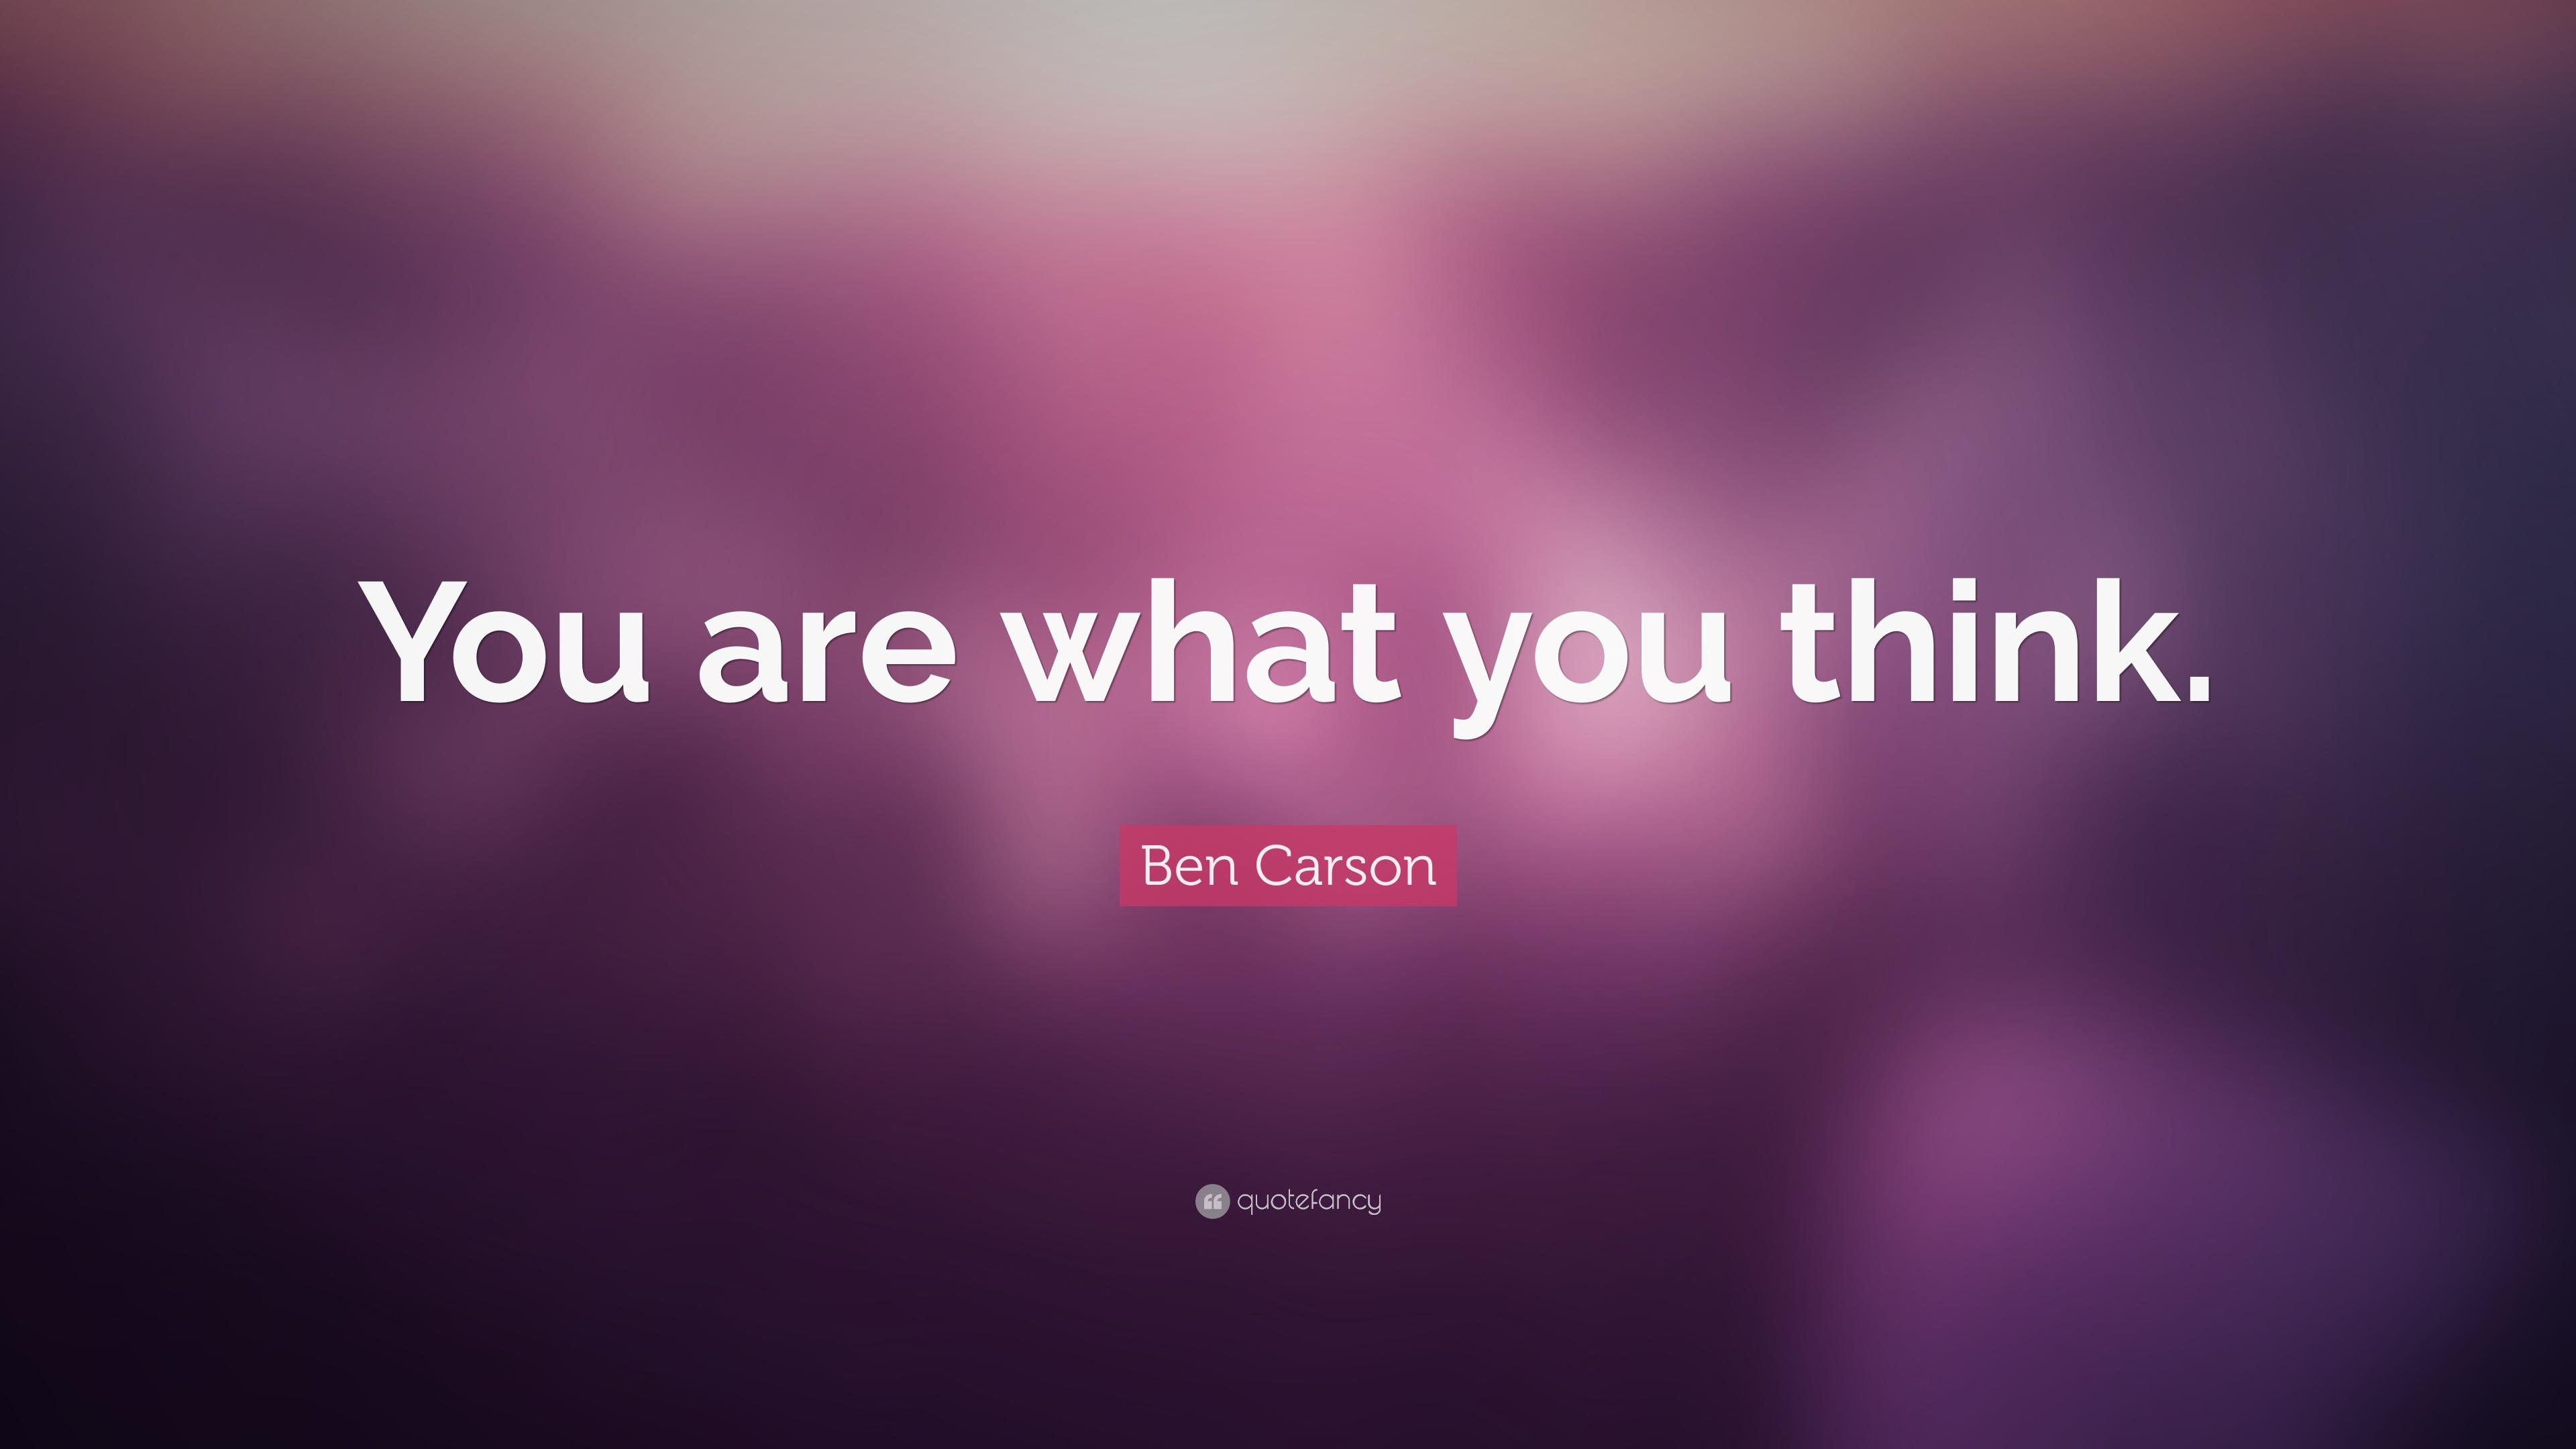 Ben Carson Quote: “You are what you think.” (12 wallpaper)